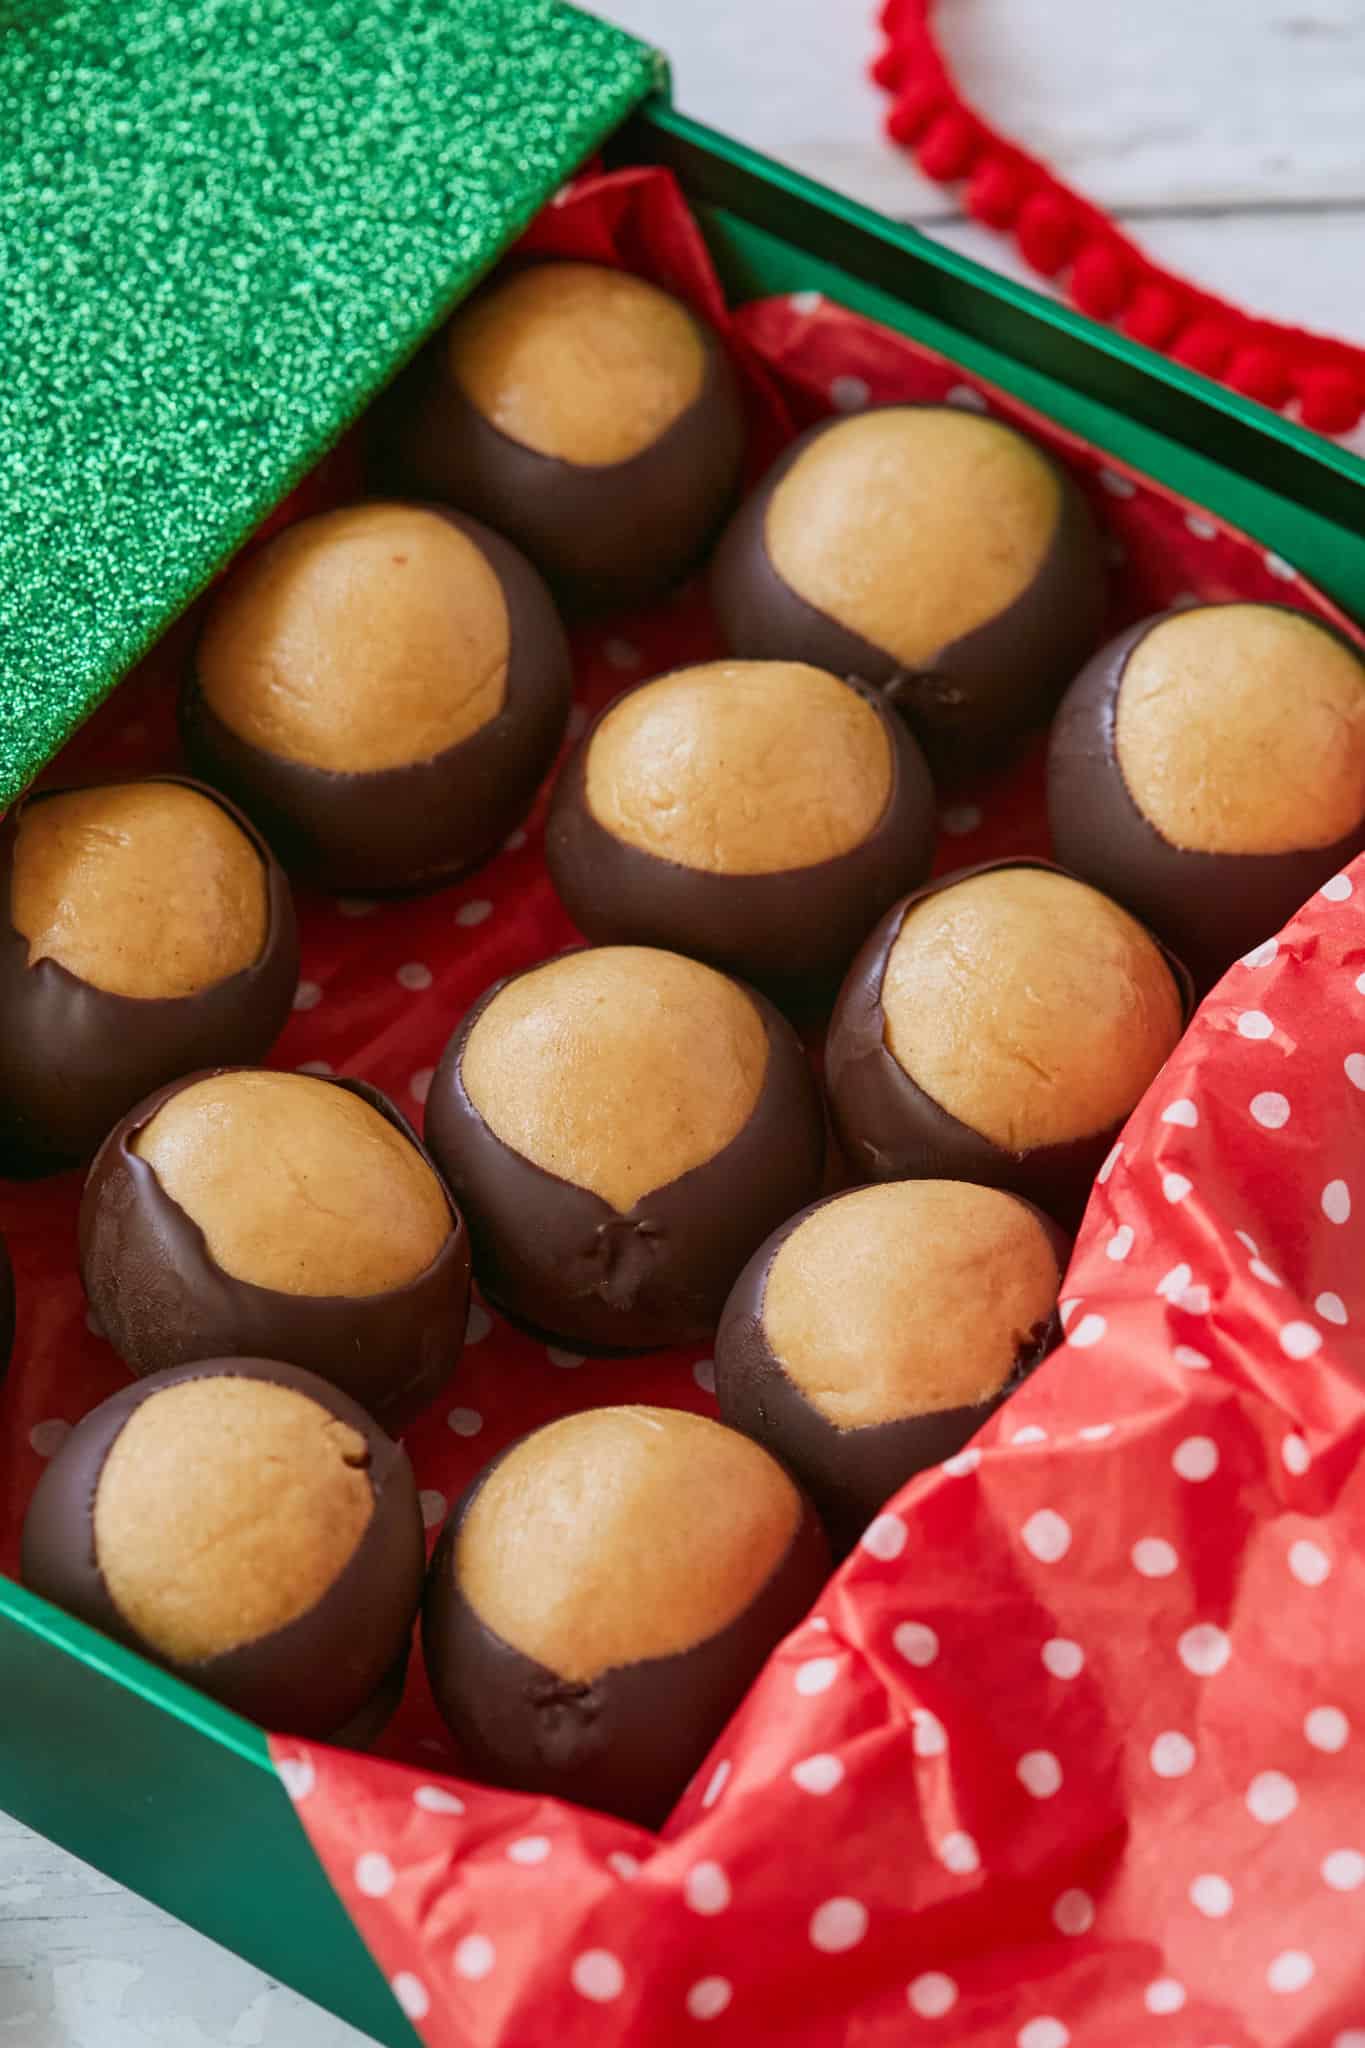 A close up of buckeyes to show the peanut butter and chocolate.